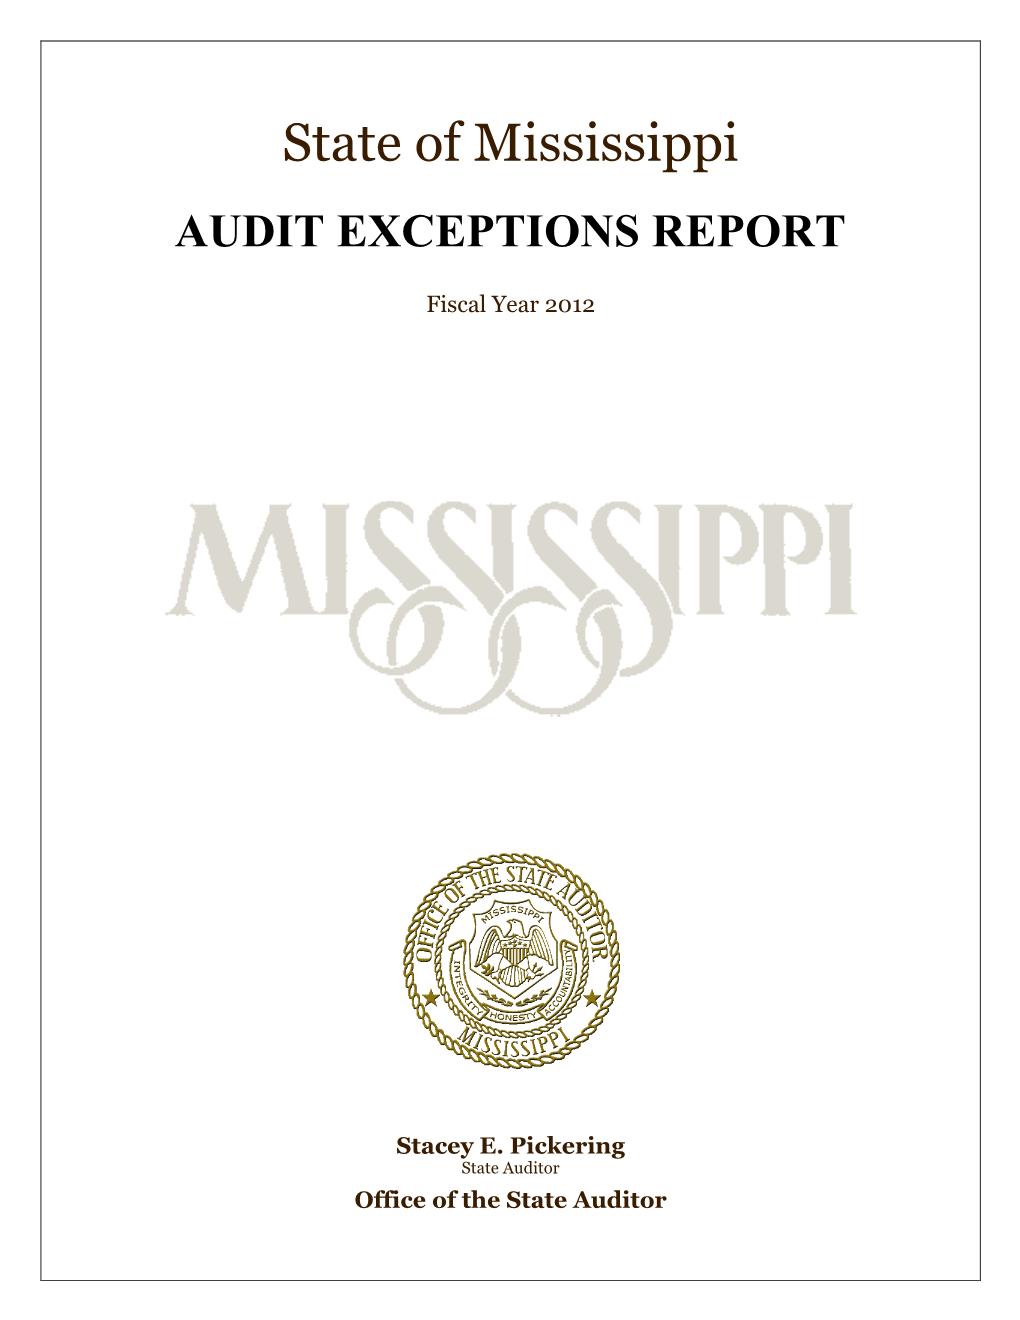 Audit Exceptions Report